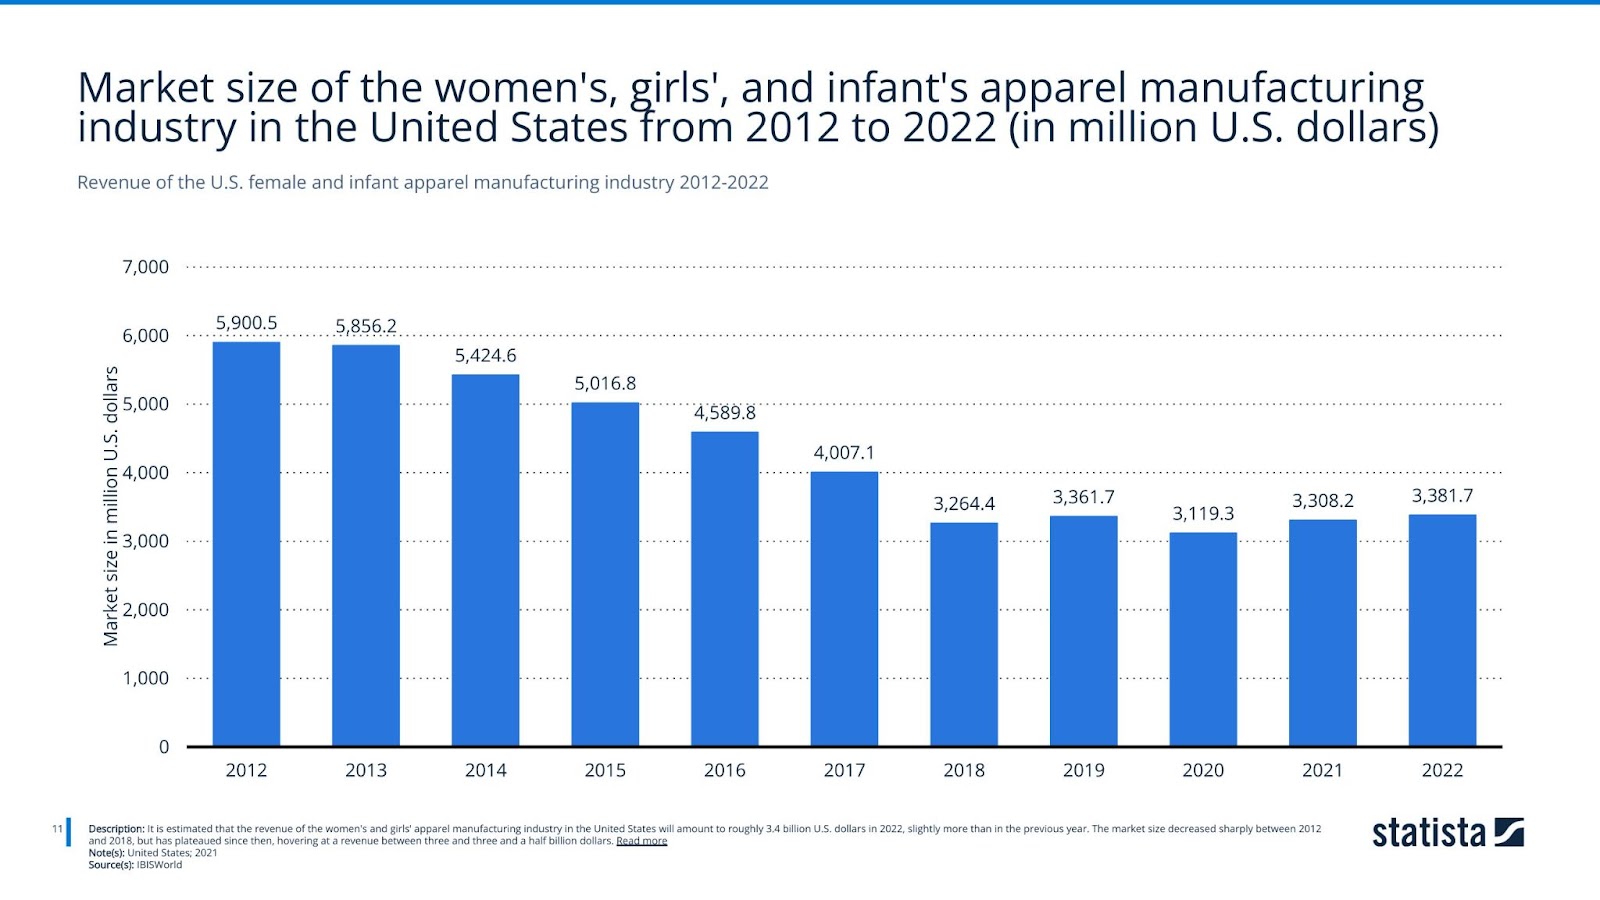 Revenue of the U.S. female and infant apparel manufacturing industry 2012-2022